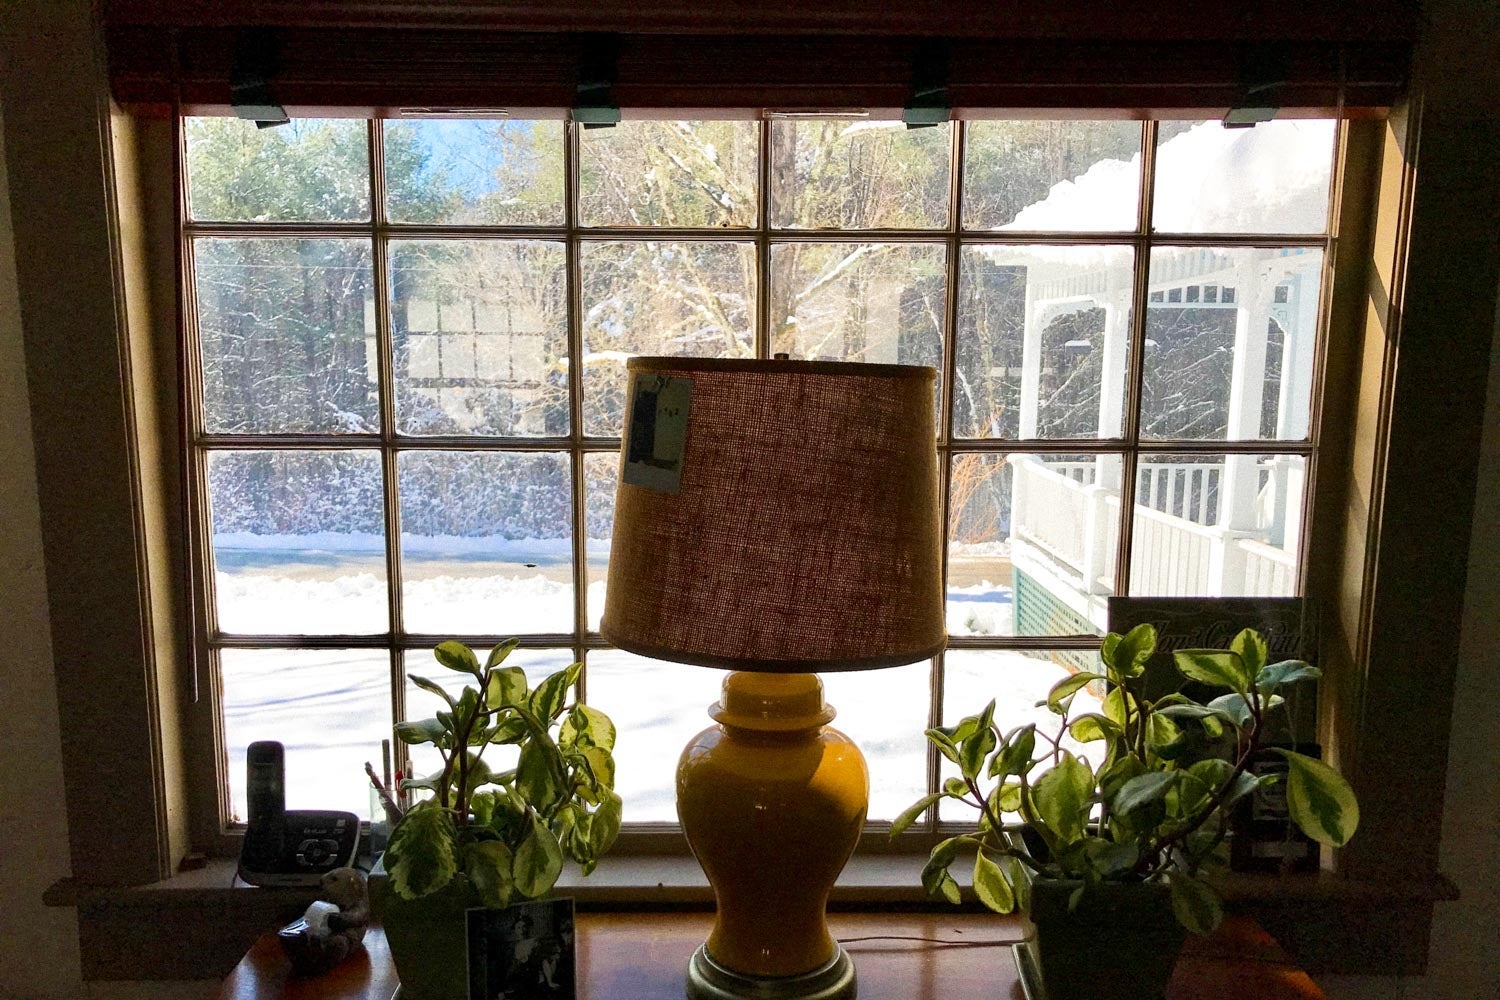 Window facing lawn with lamp in foreground.